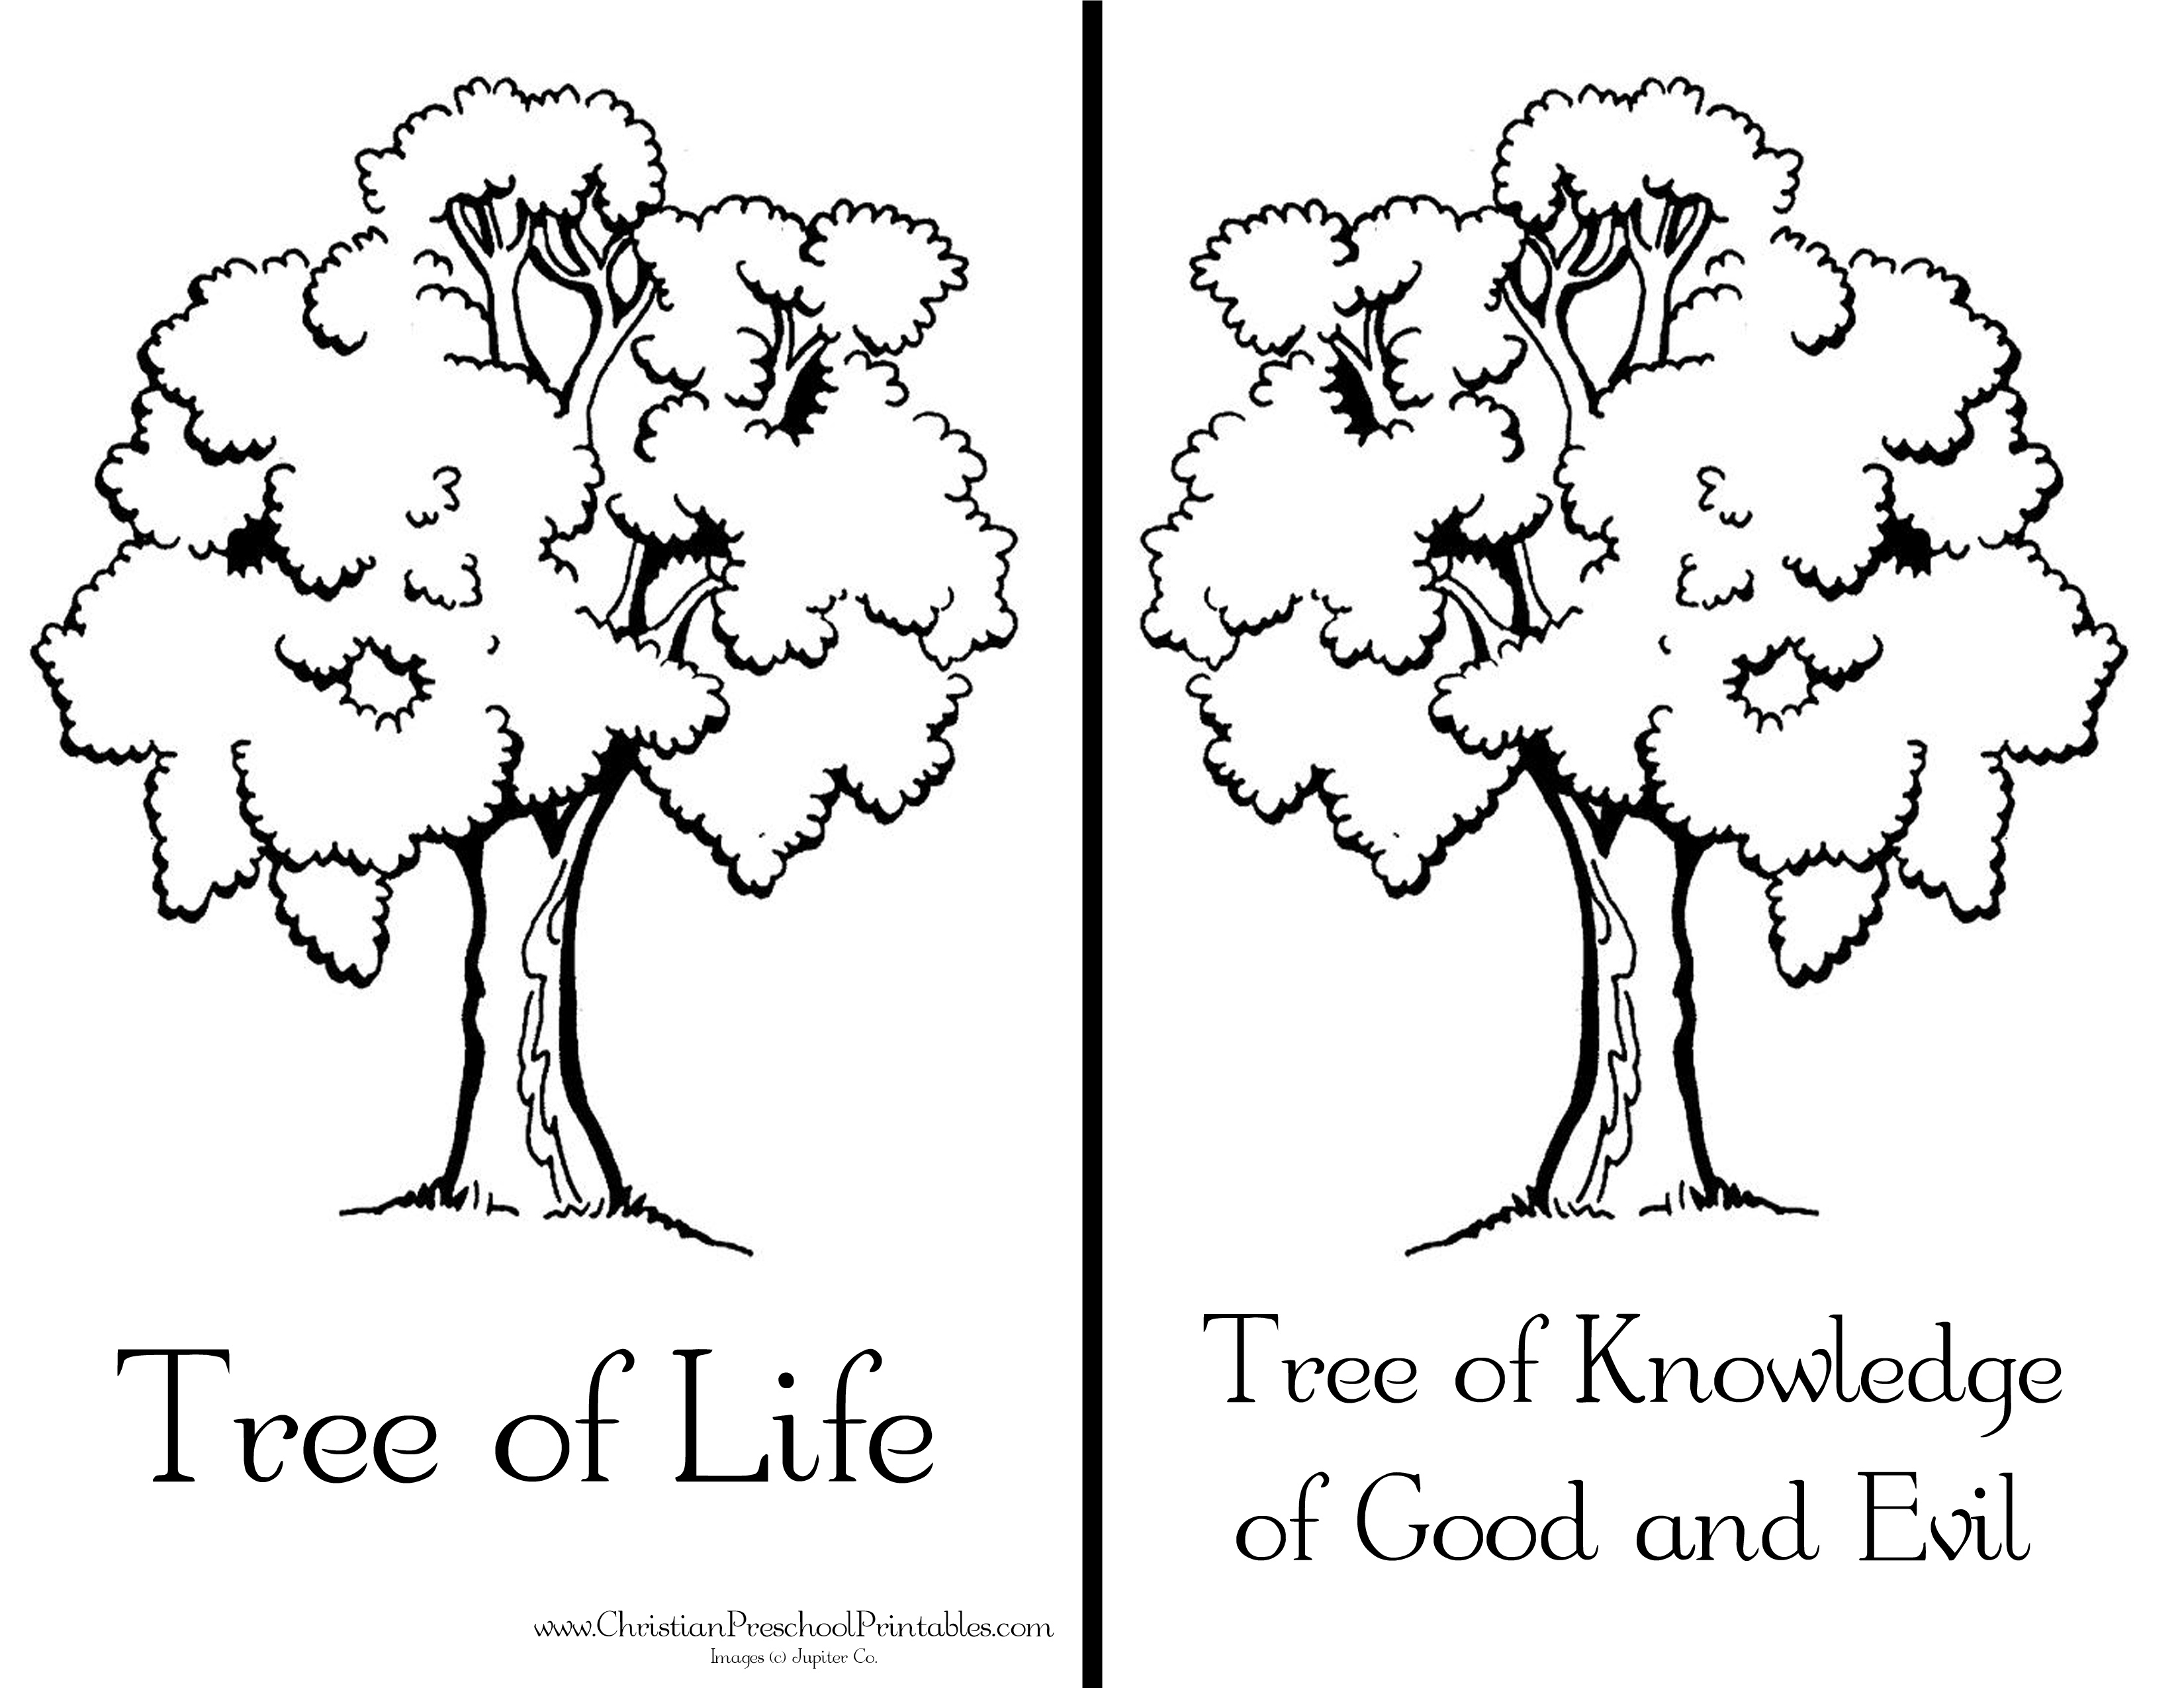 Tree Of Life Coloring Pages - Coloring Home